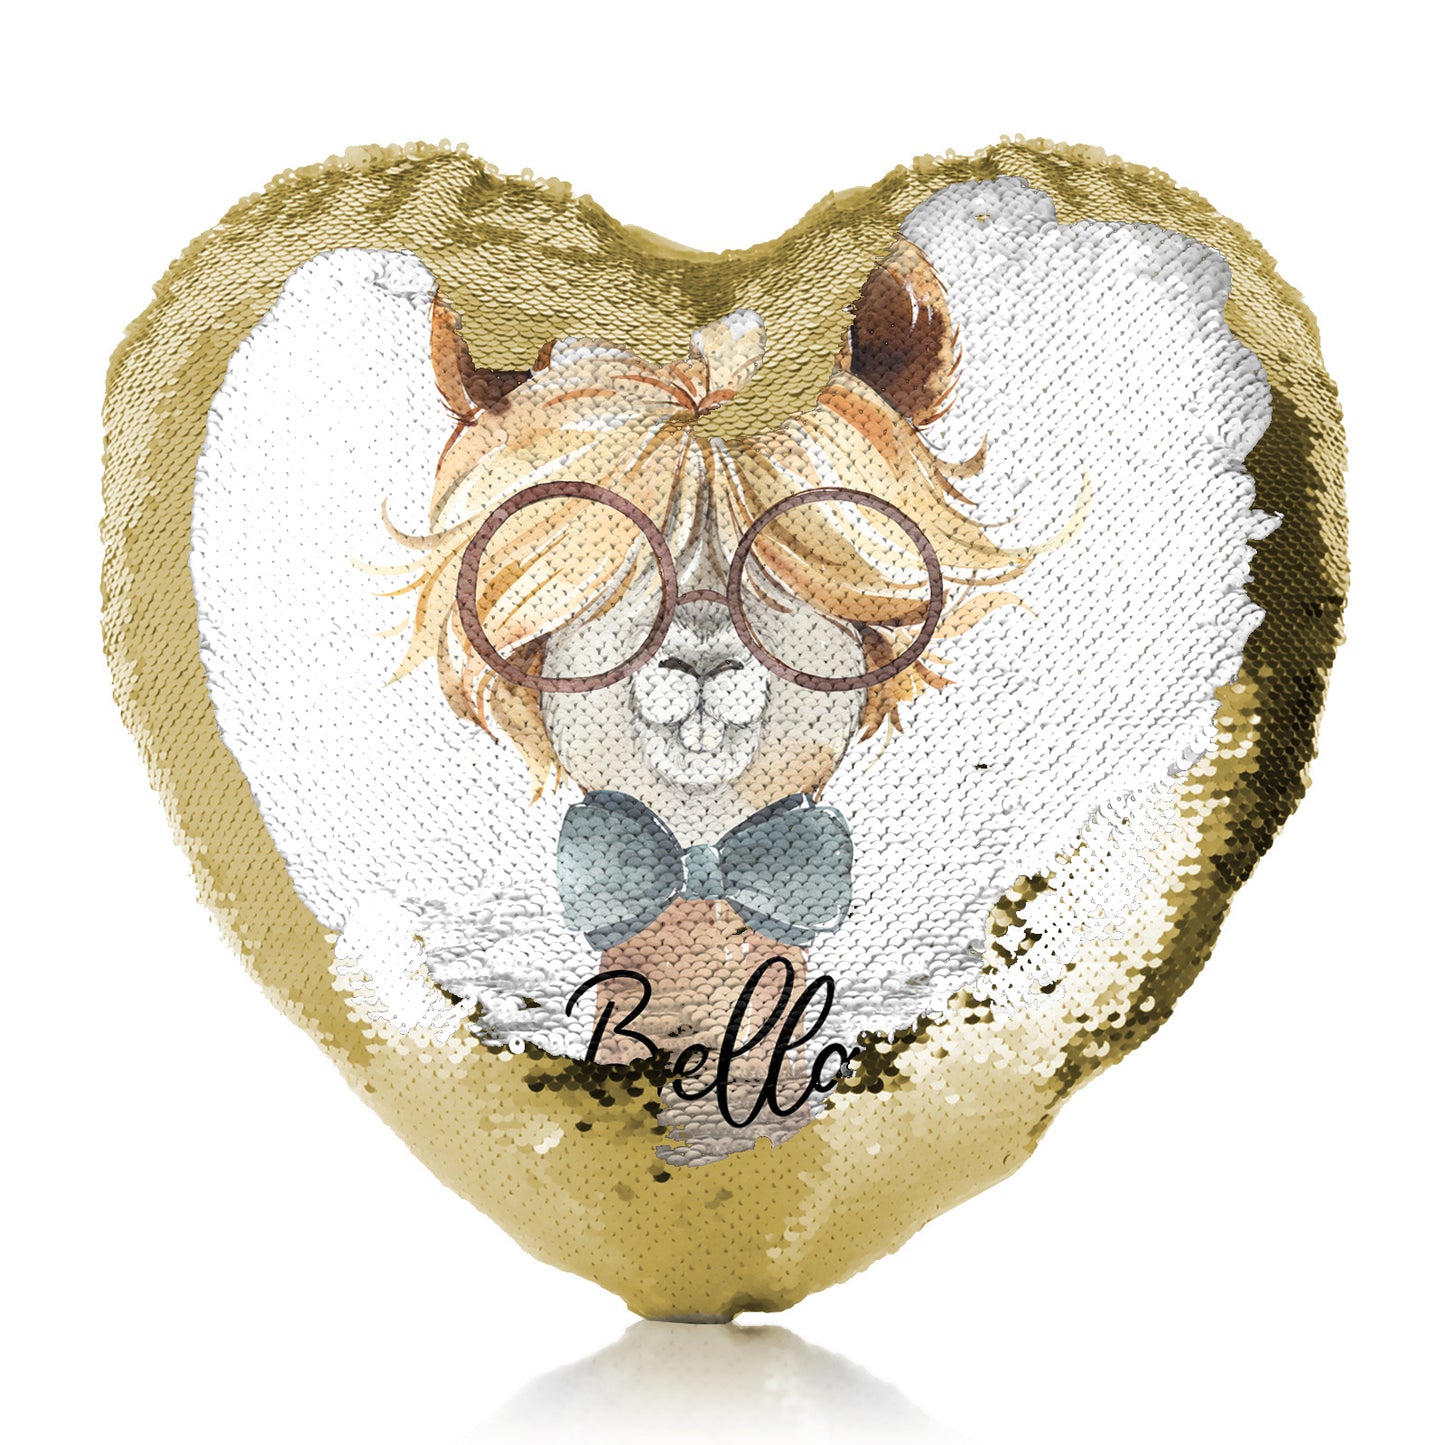 Personalised Sequin Heart Cushion with Alpaca Bow Tie and Glasses and Cute Text